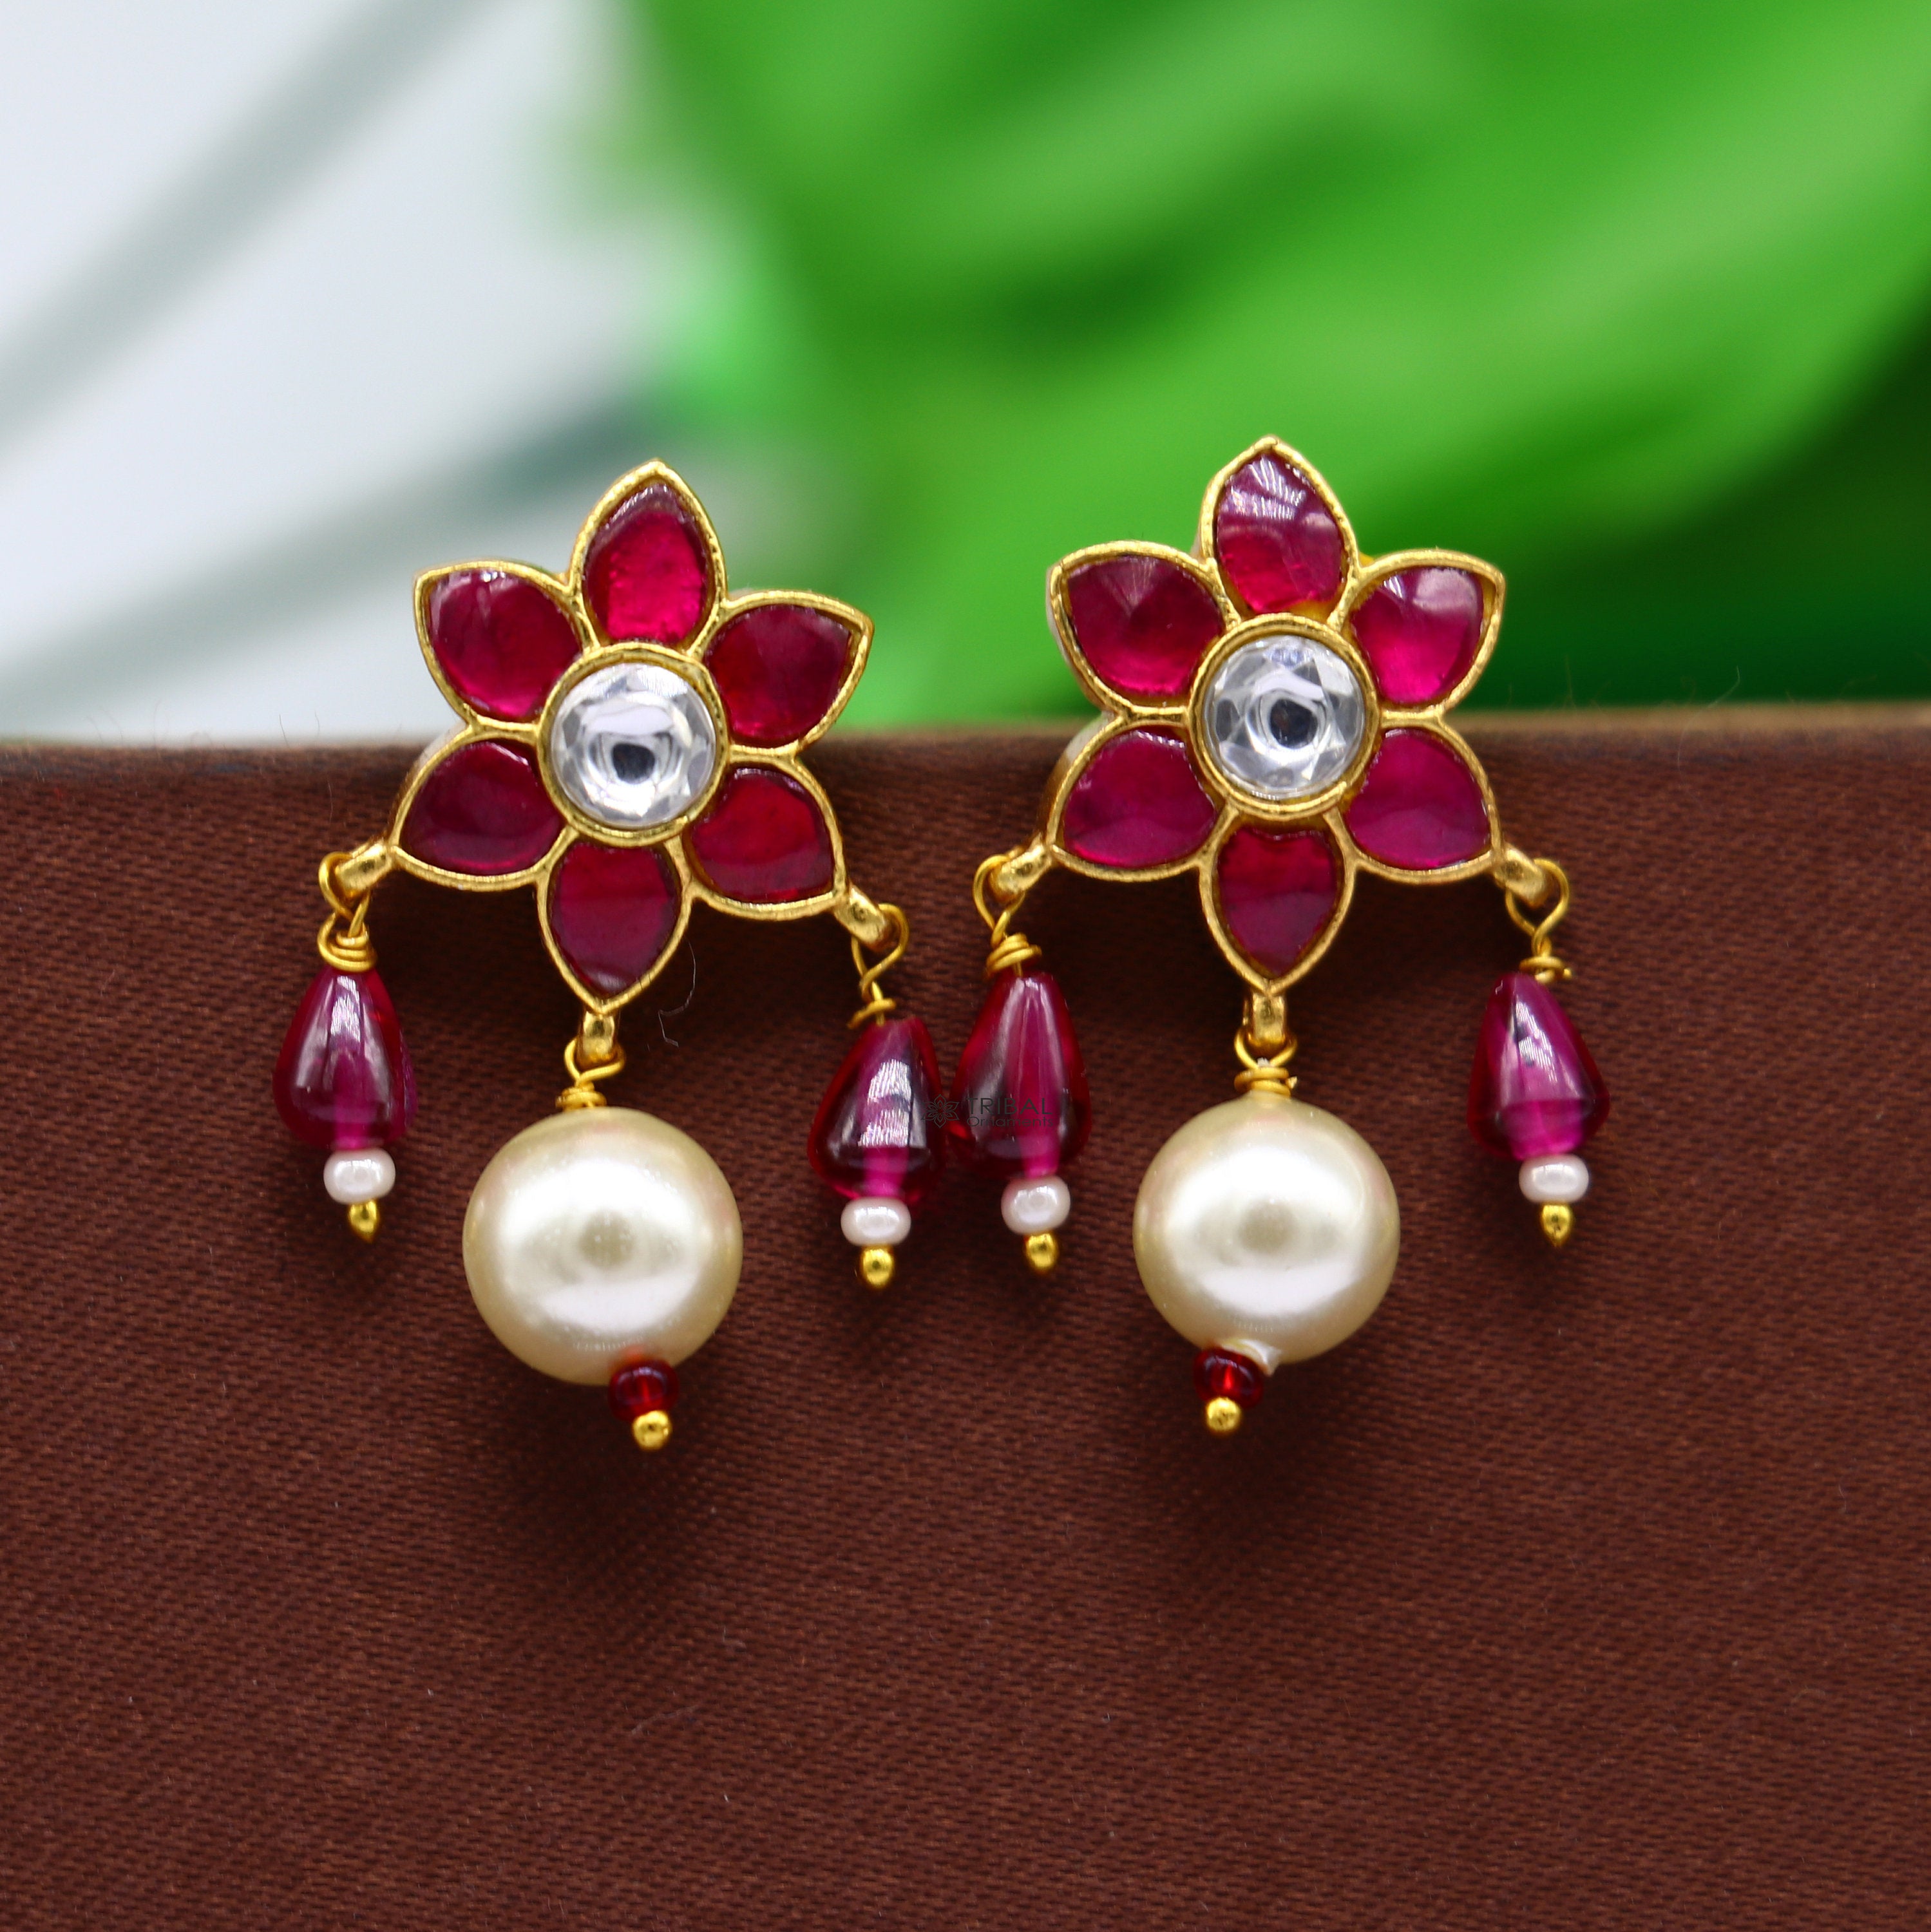 The Red & Green Stone Queensly Duck Earrings at Rs 429.00 | Delhi| ID:  2852870577862